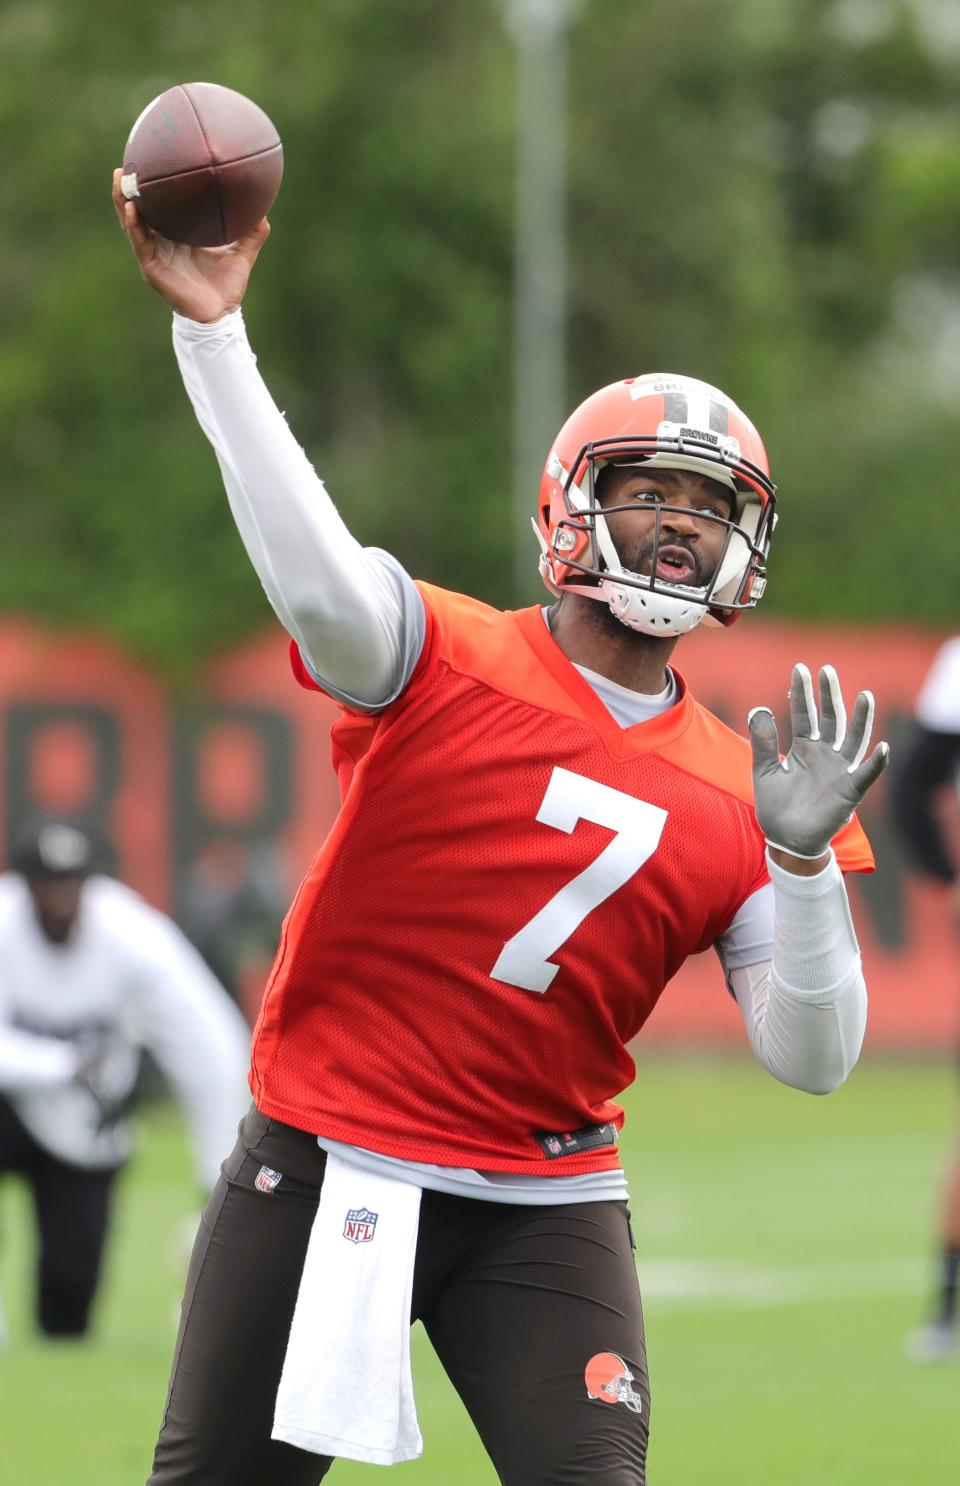 Cleveland Browns backup quarterback Jacoby Brissett throws a pass during minicamp on Tuesday, June 14, 2022 in Berea.